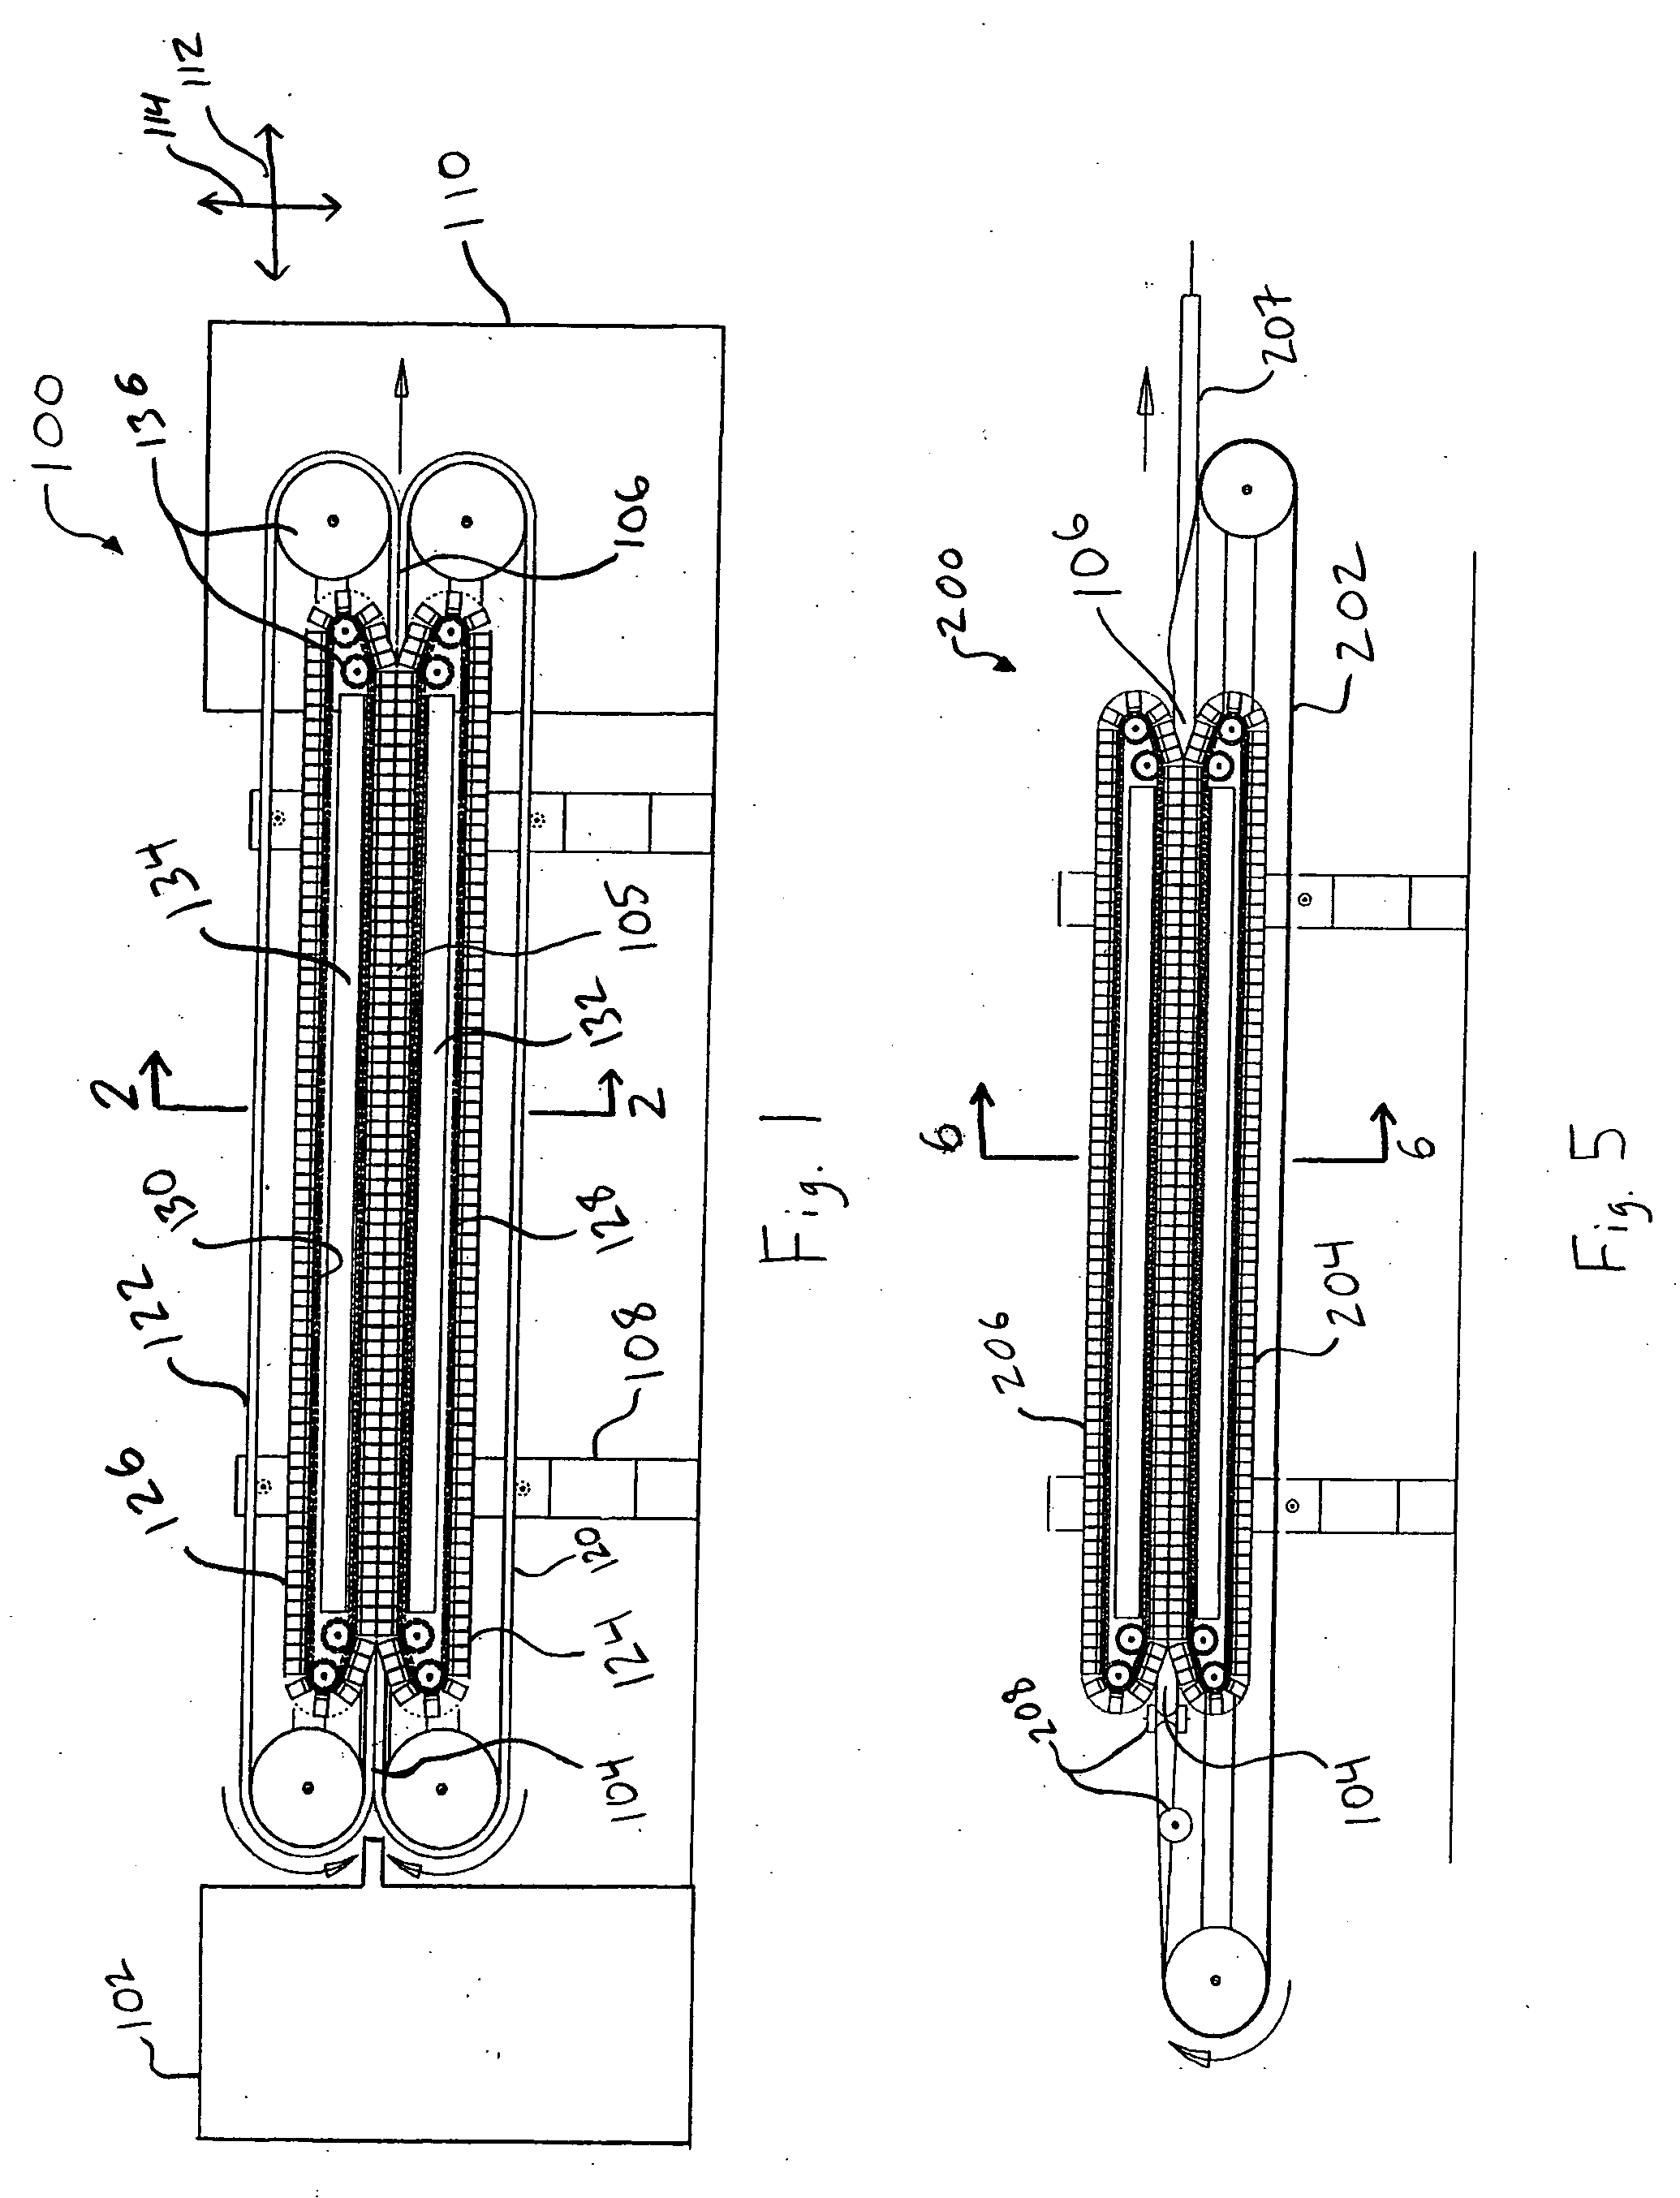 Continuous forming apparatus for three-dimensional foam products